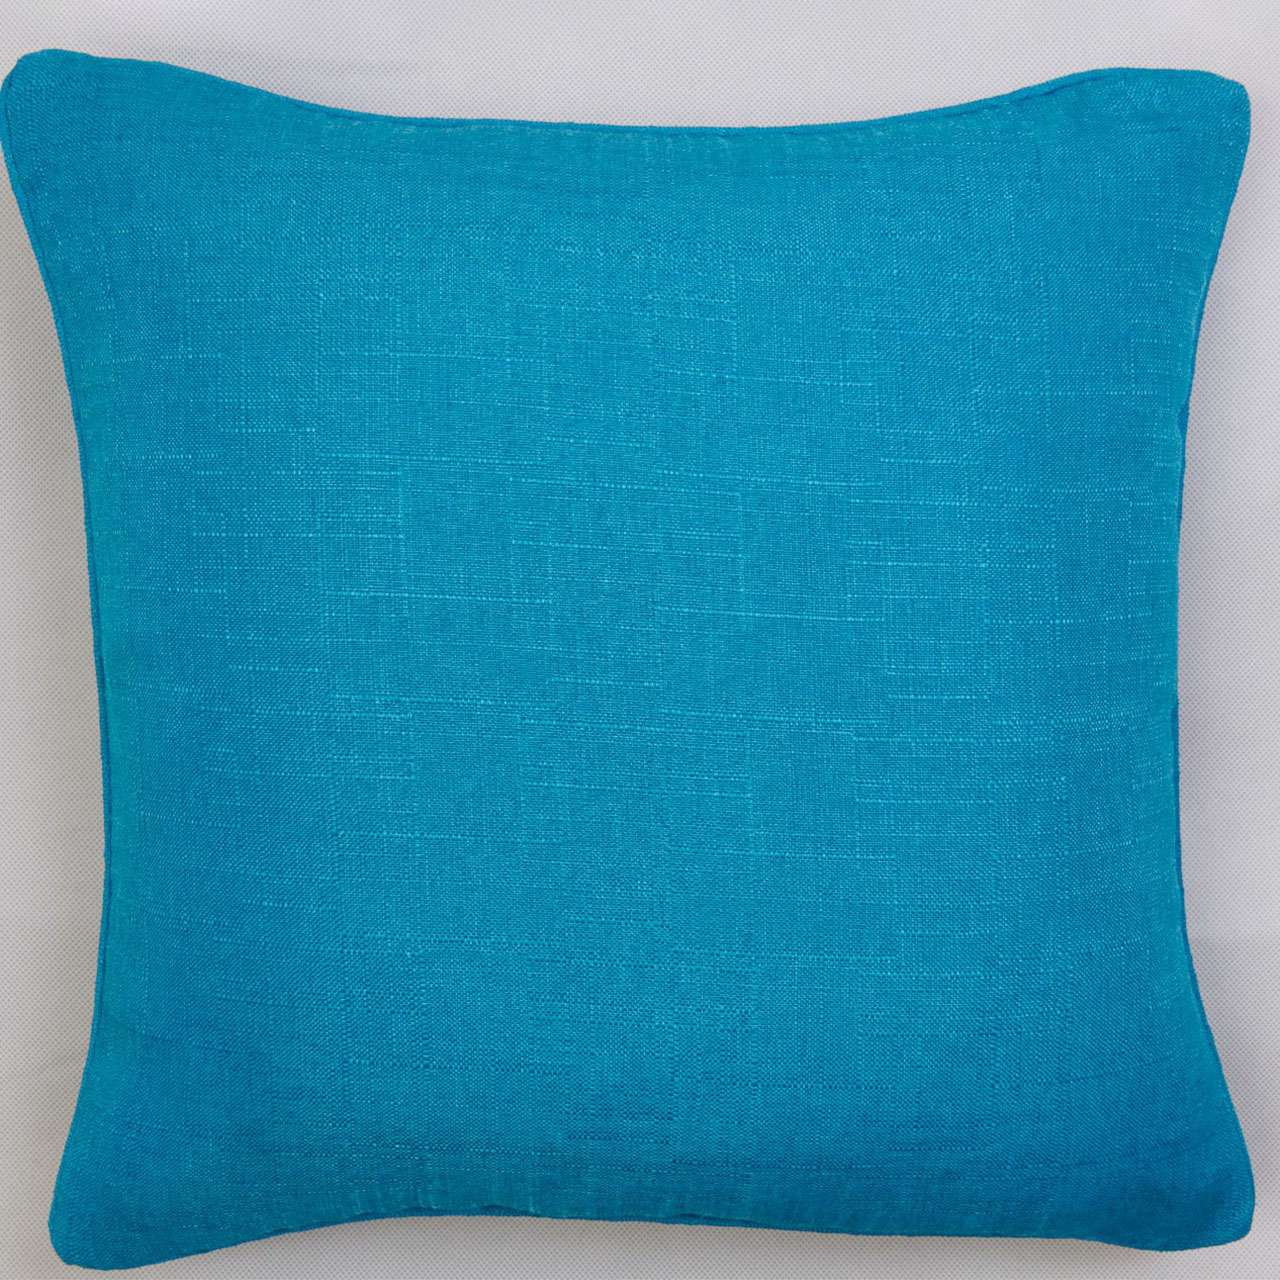 Colourful Textured Cushions - Set of 2